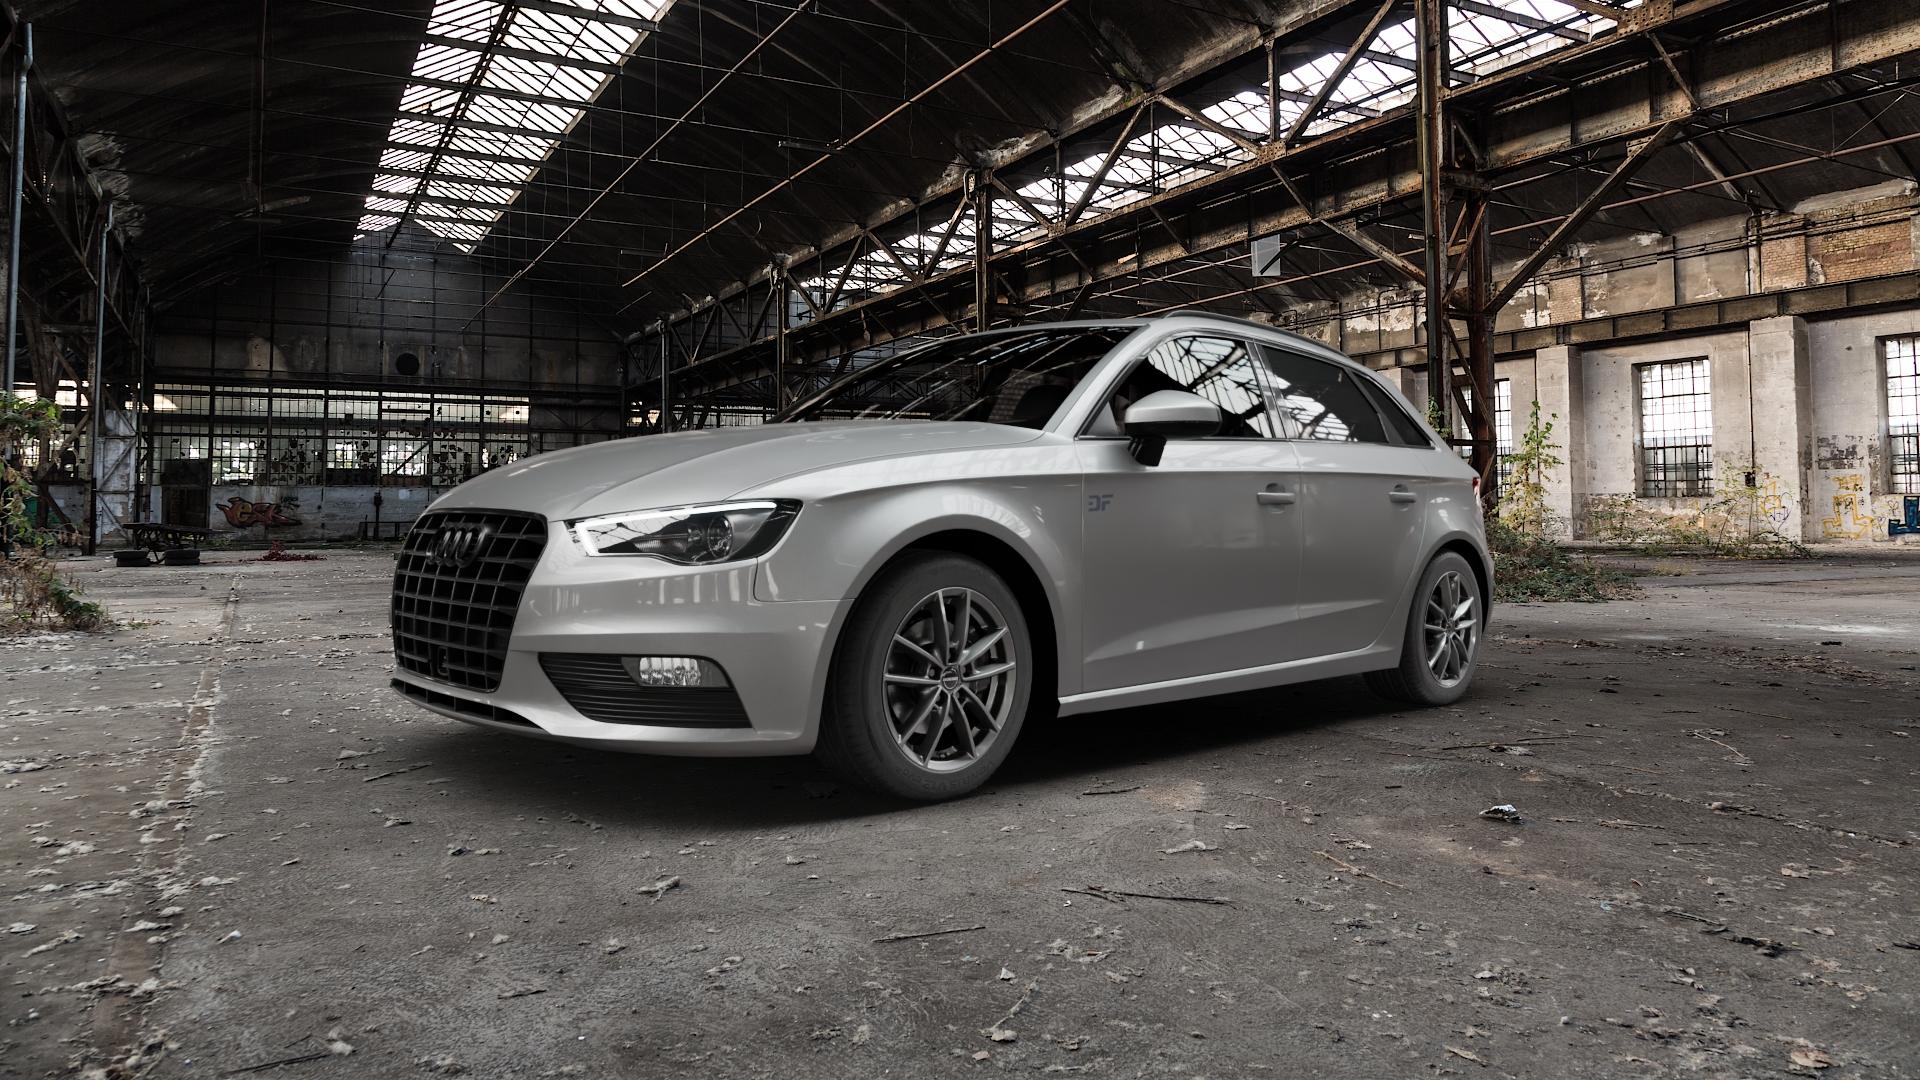 Borbet W mistral anthracite glossy Felge mit Reifen grau in 16Zoll Winterfelge Alufelge auf silbernem Audi A3 Typ 8V (Sportback) 1,4l TFSI 90kW (122 PS) 1,8l 132kW (179 1,6l TDI 77kW (105 2,0l 110kW (150 quattro 221kW S3 (300 103kW (140 1,2l 135kW (184 81kW (110 ⬇️ mit 15mm Tieferlegung ⬇️ Old Industrial Hall_max5000mm_2022 Frontansicht_1